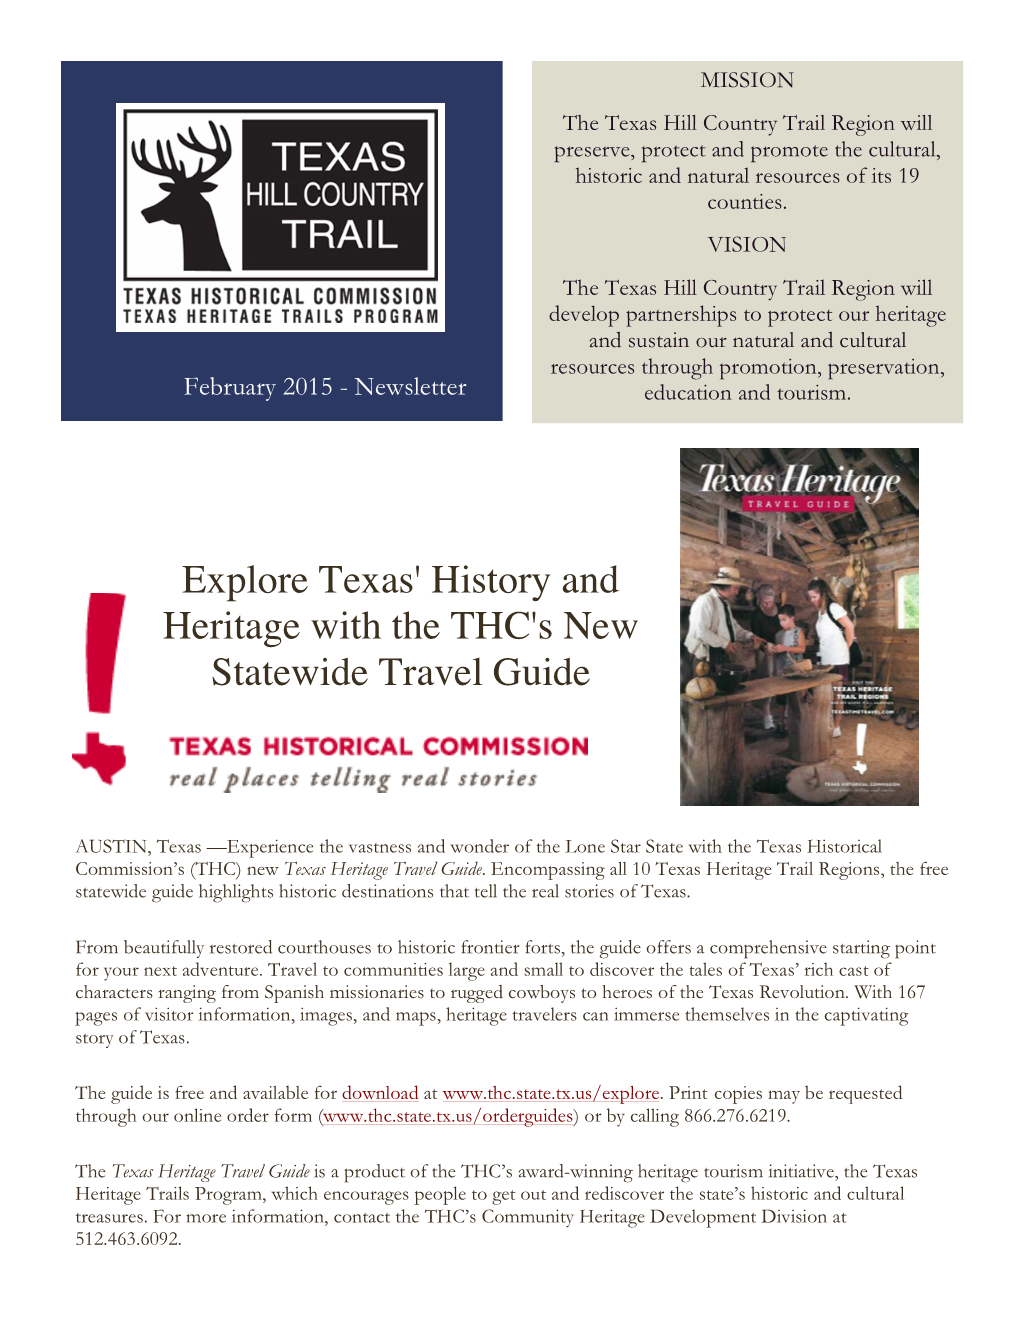 Explore Texas' History and Heritage with the THC's New Statewide Travel Guide